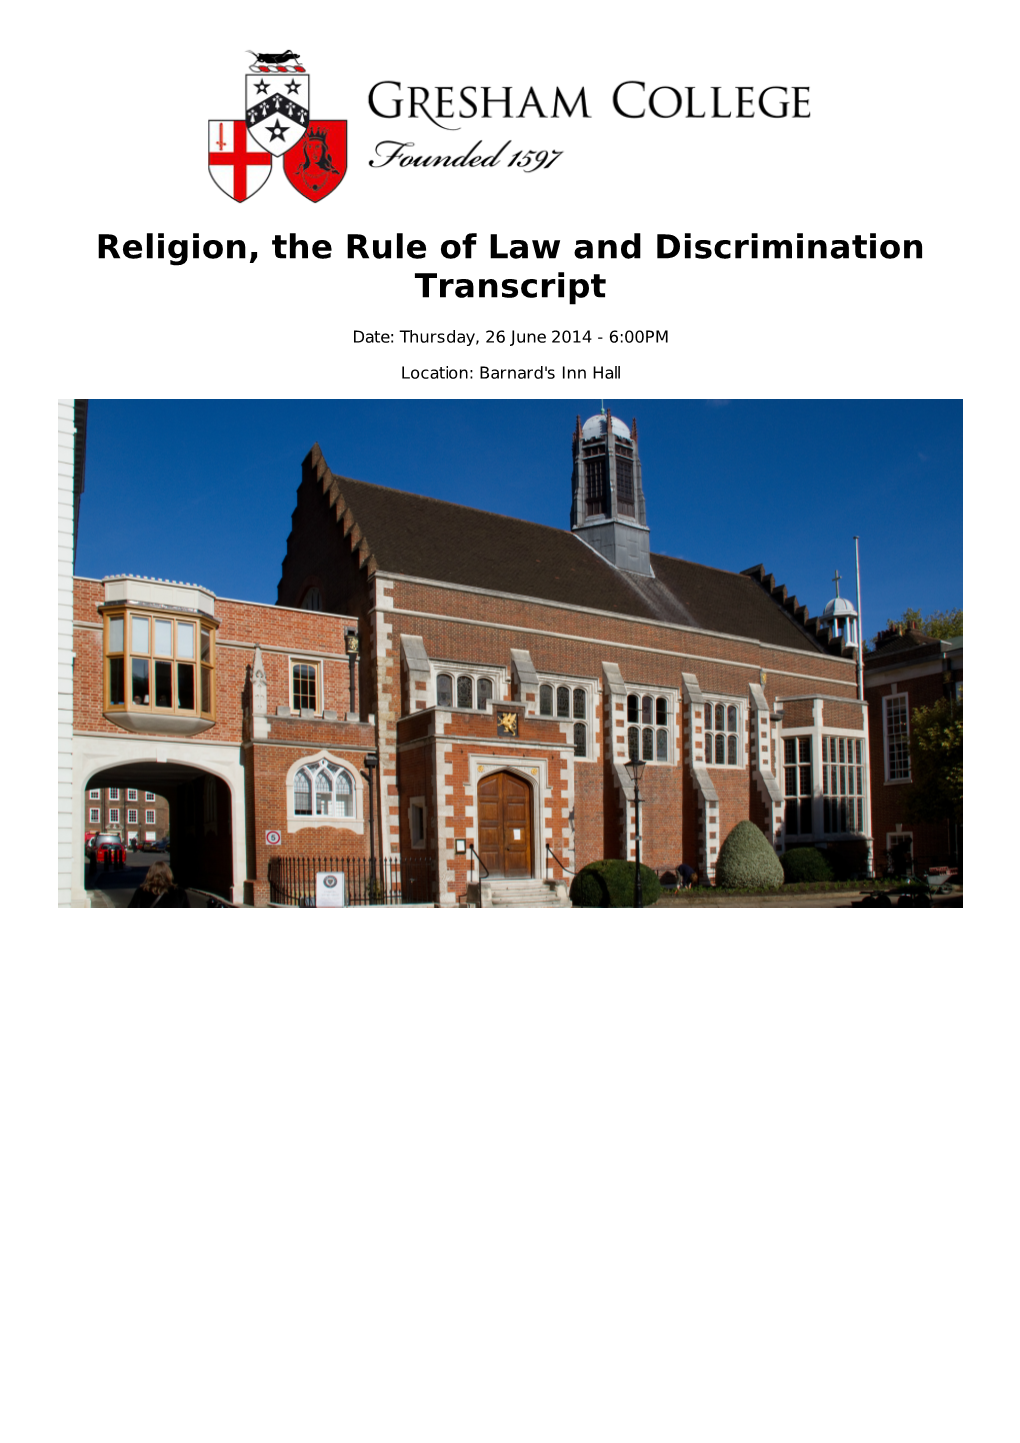 Religion, the Rule of Law and Discrimination Transcript